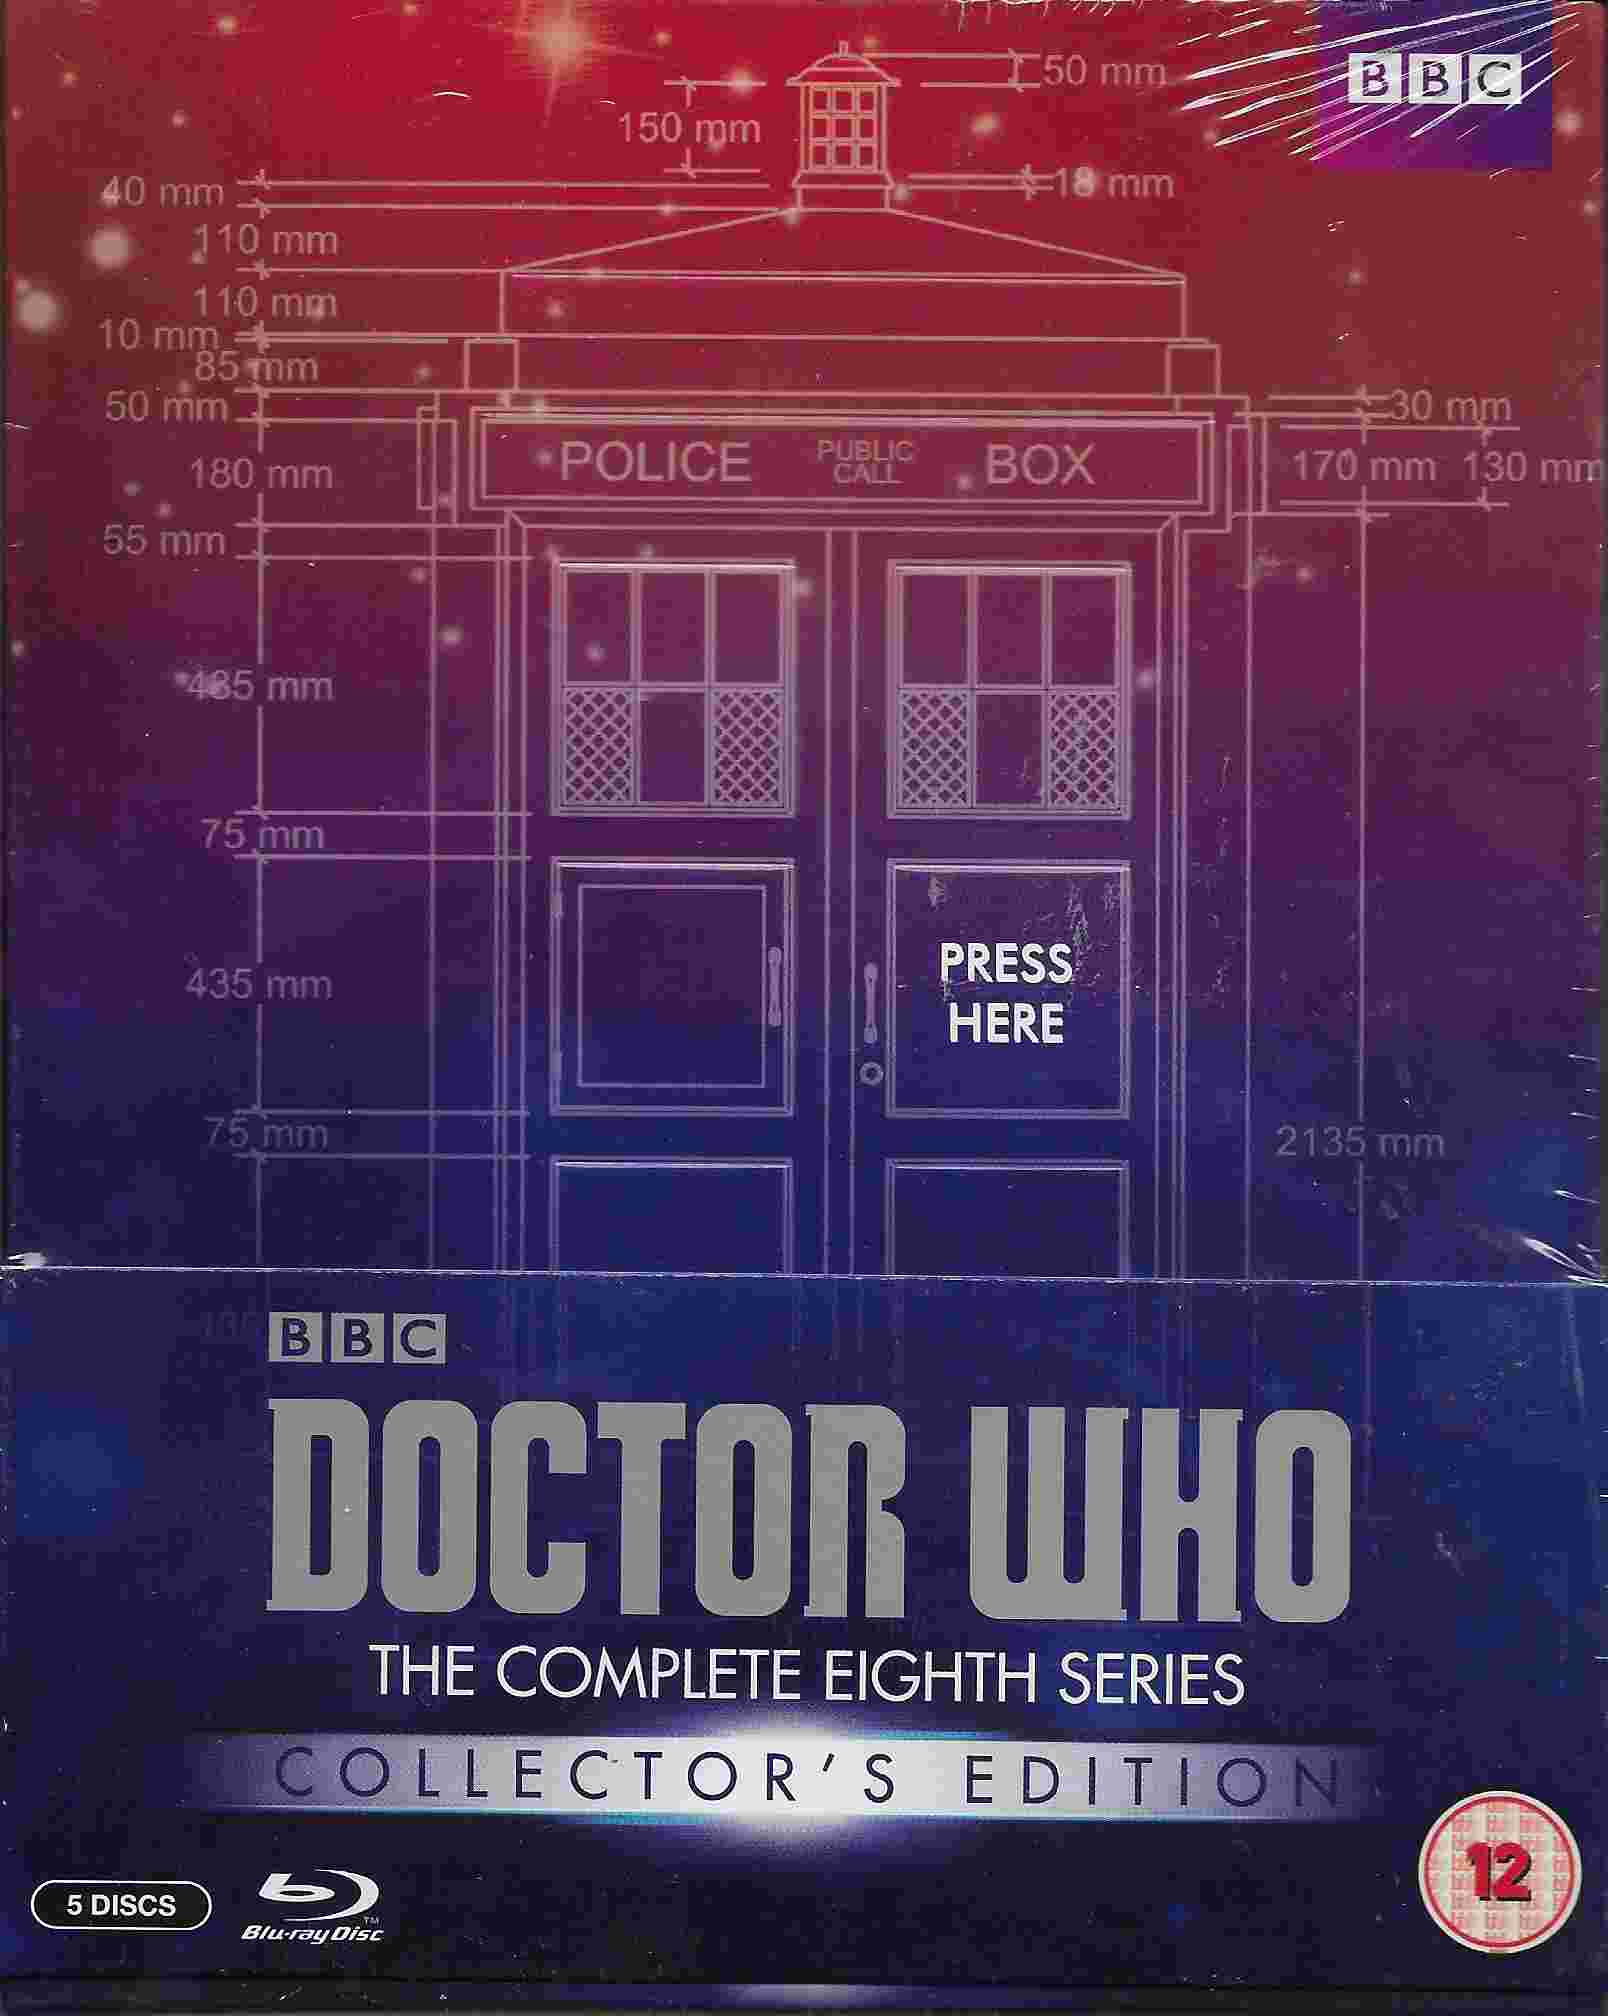 Picture of BBCBD 0289 Doctor Who - Series 8 boxed set (Limited BBC shop packaging) by artist Various from the BBC blu-rays - Records and Tapes library